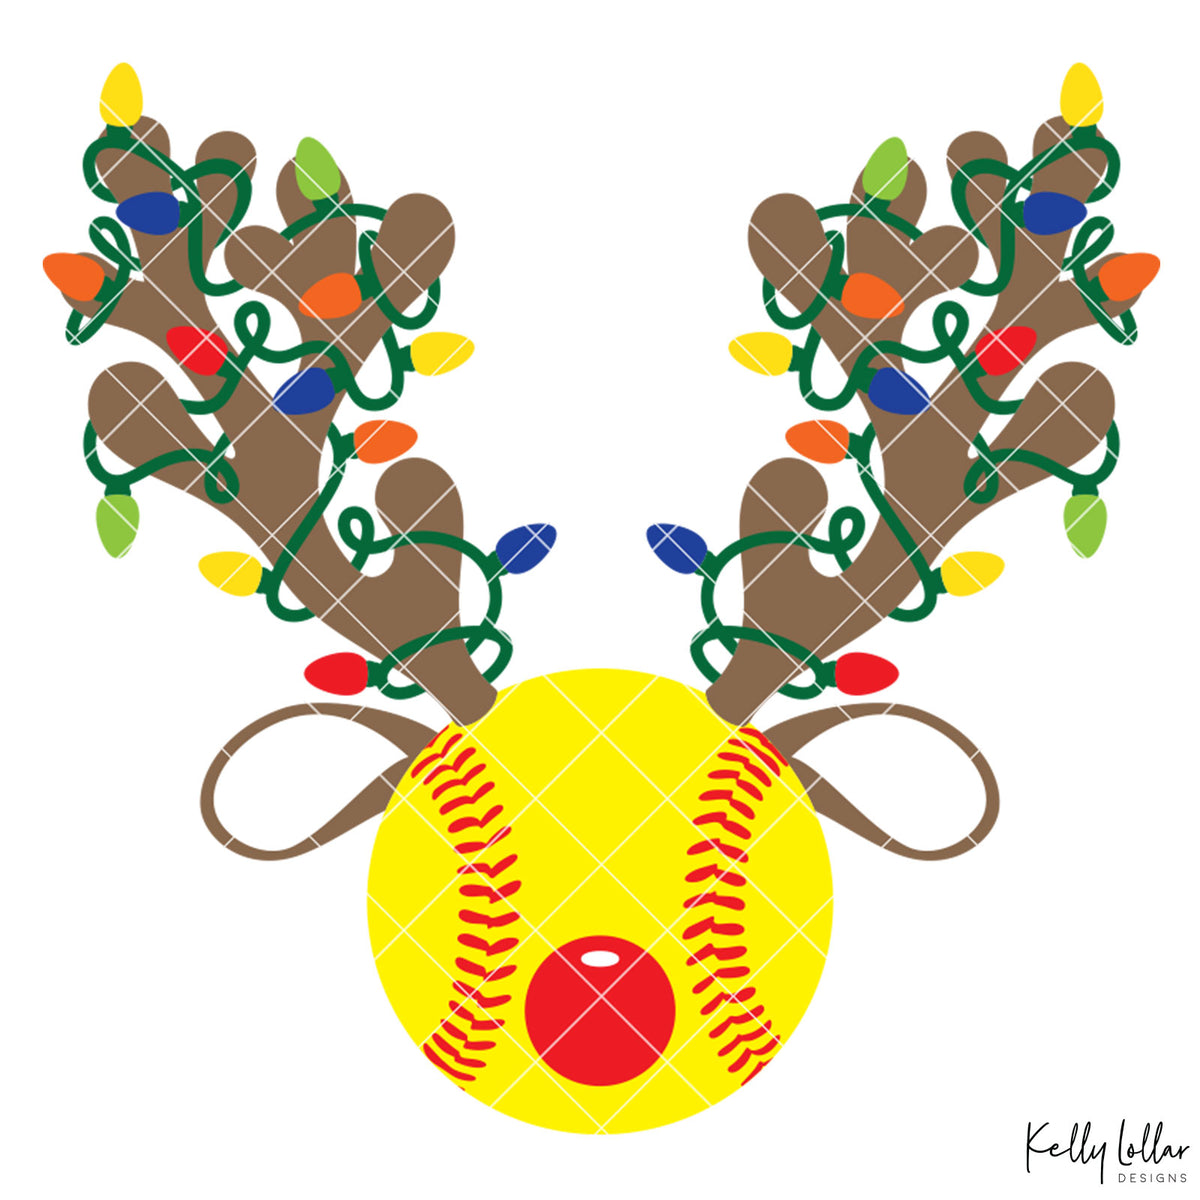 Reindeer Softball | Christmas Light Wrapped Reindeer Antlers and Ears on a Baseball or Softball for Holiday Shirts and Decor | SVG DXF PNG Cut Files